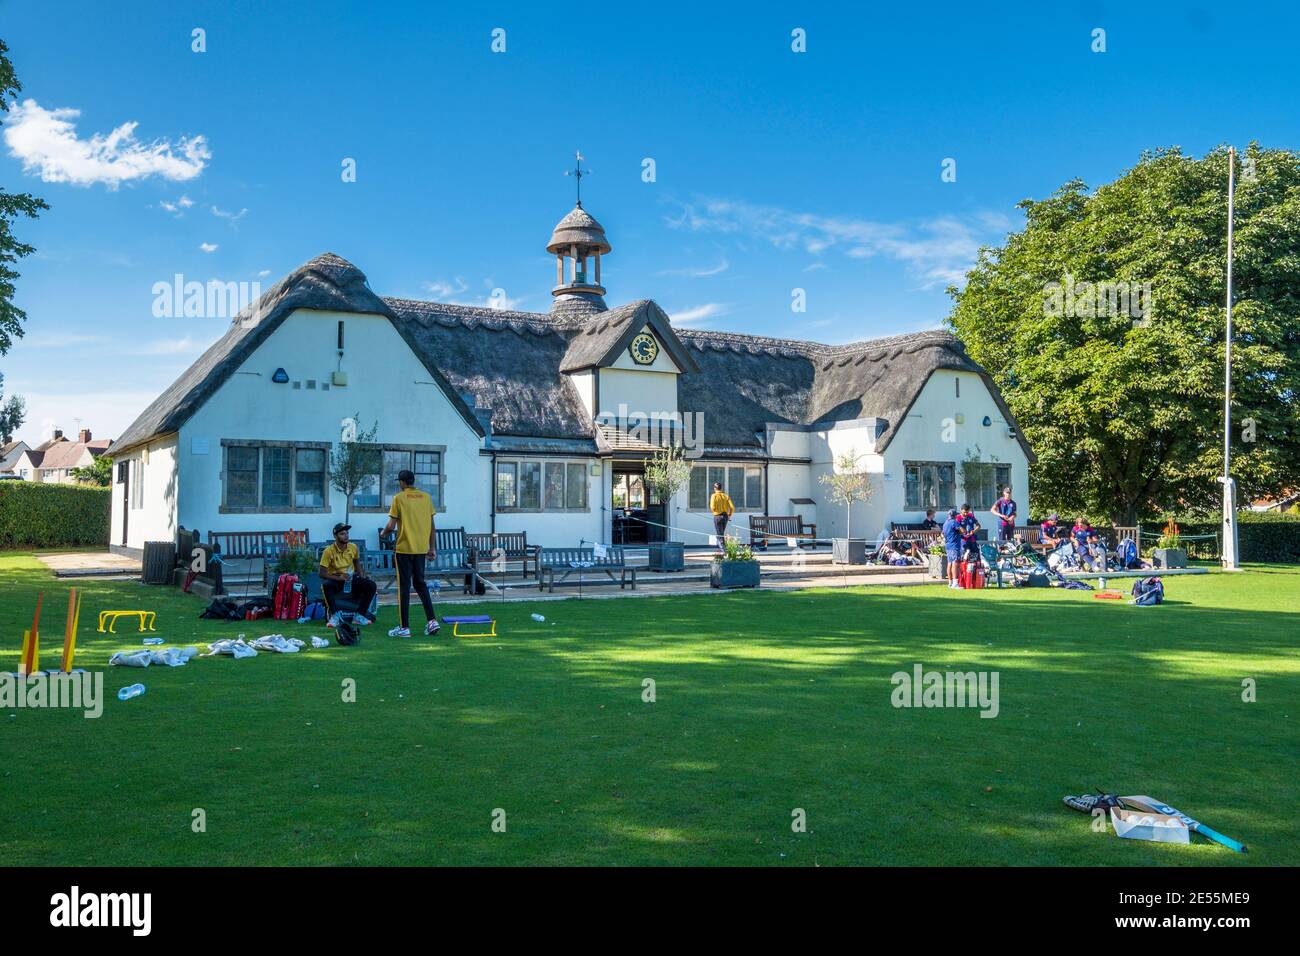 The pretty thatched cricket pavilion in Uppingham. Stock Photo